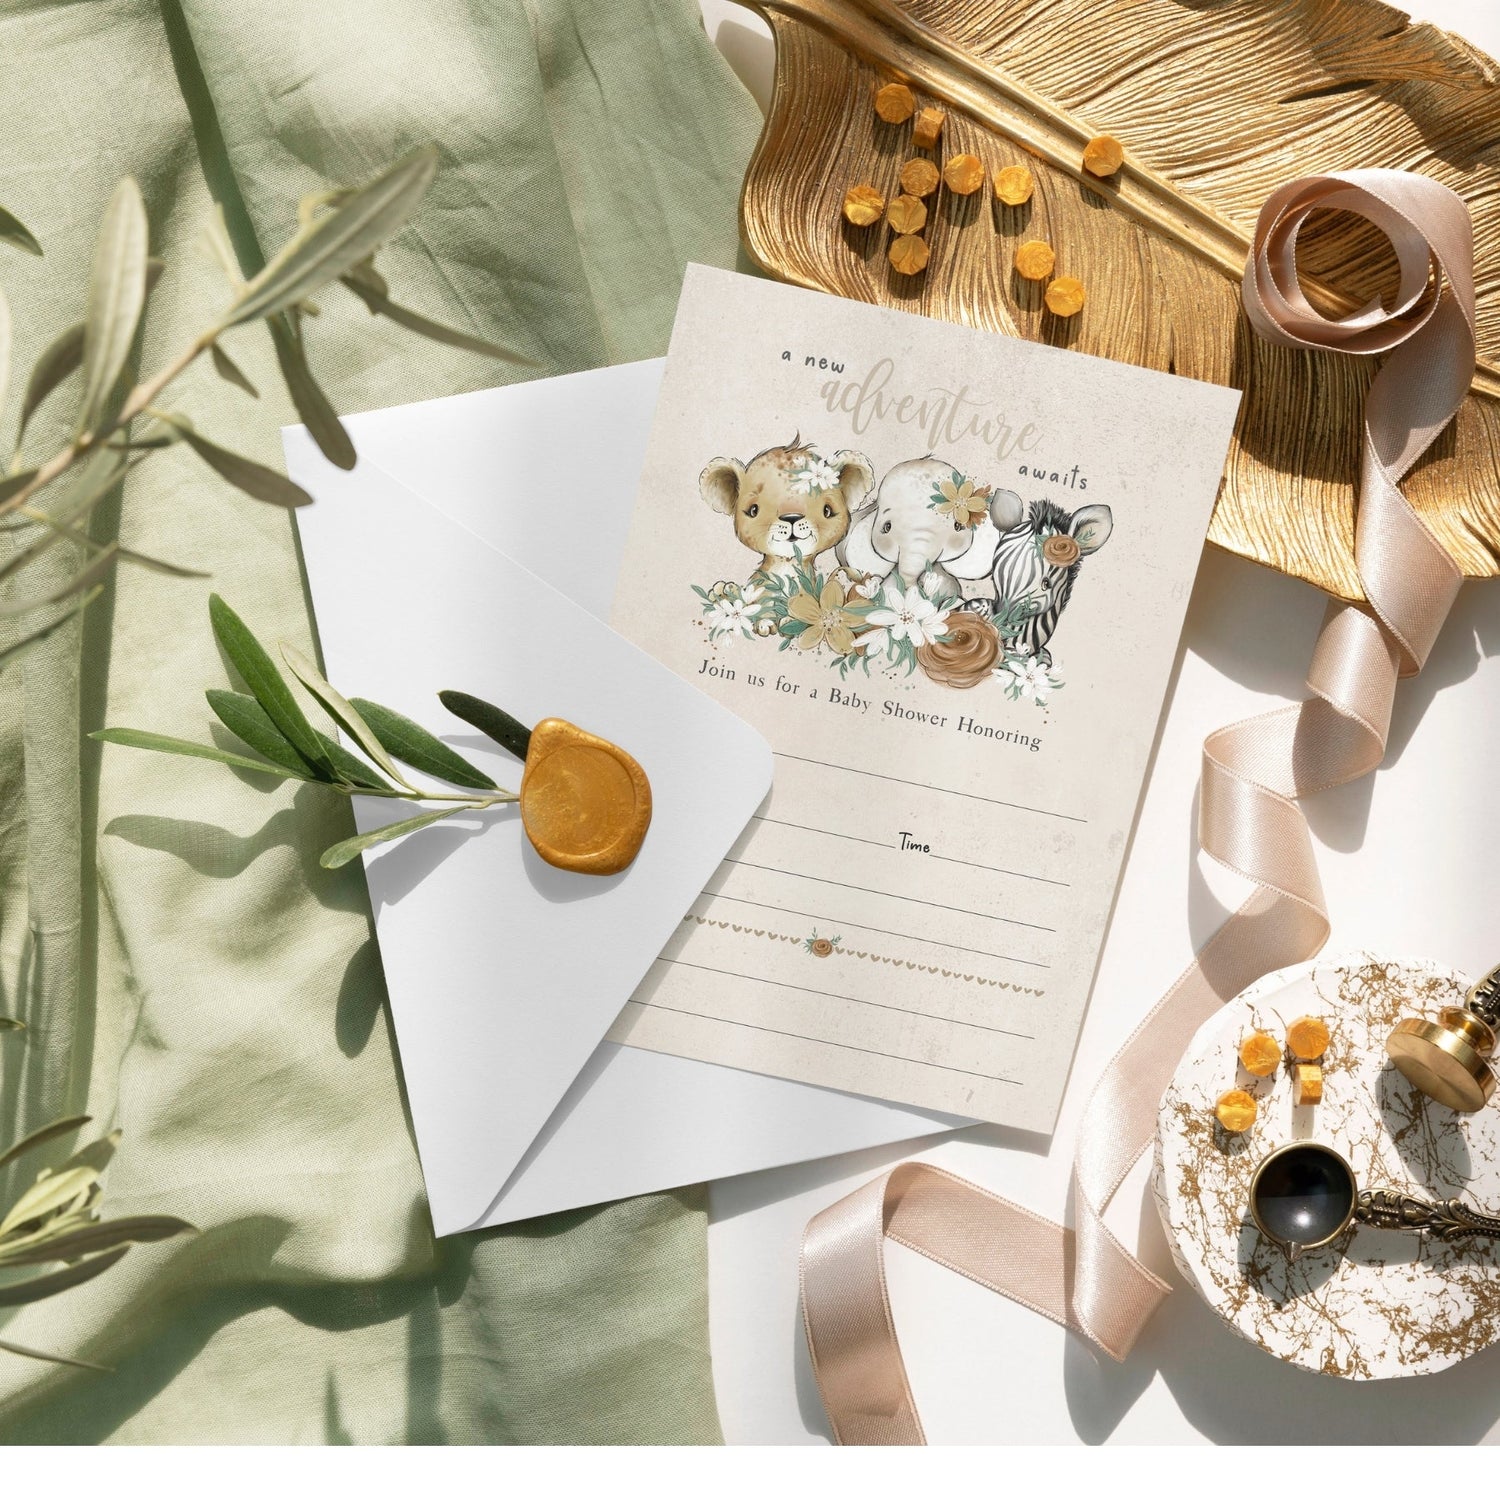 Step into a lush flora jungle with our exquisite baby shower theme, featuring bronze and gold floral designs. Browse our collection of elegant invitations, heartfelt thank you cards, and entertaining games to celebrate your special event in style.